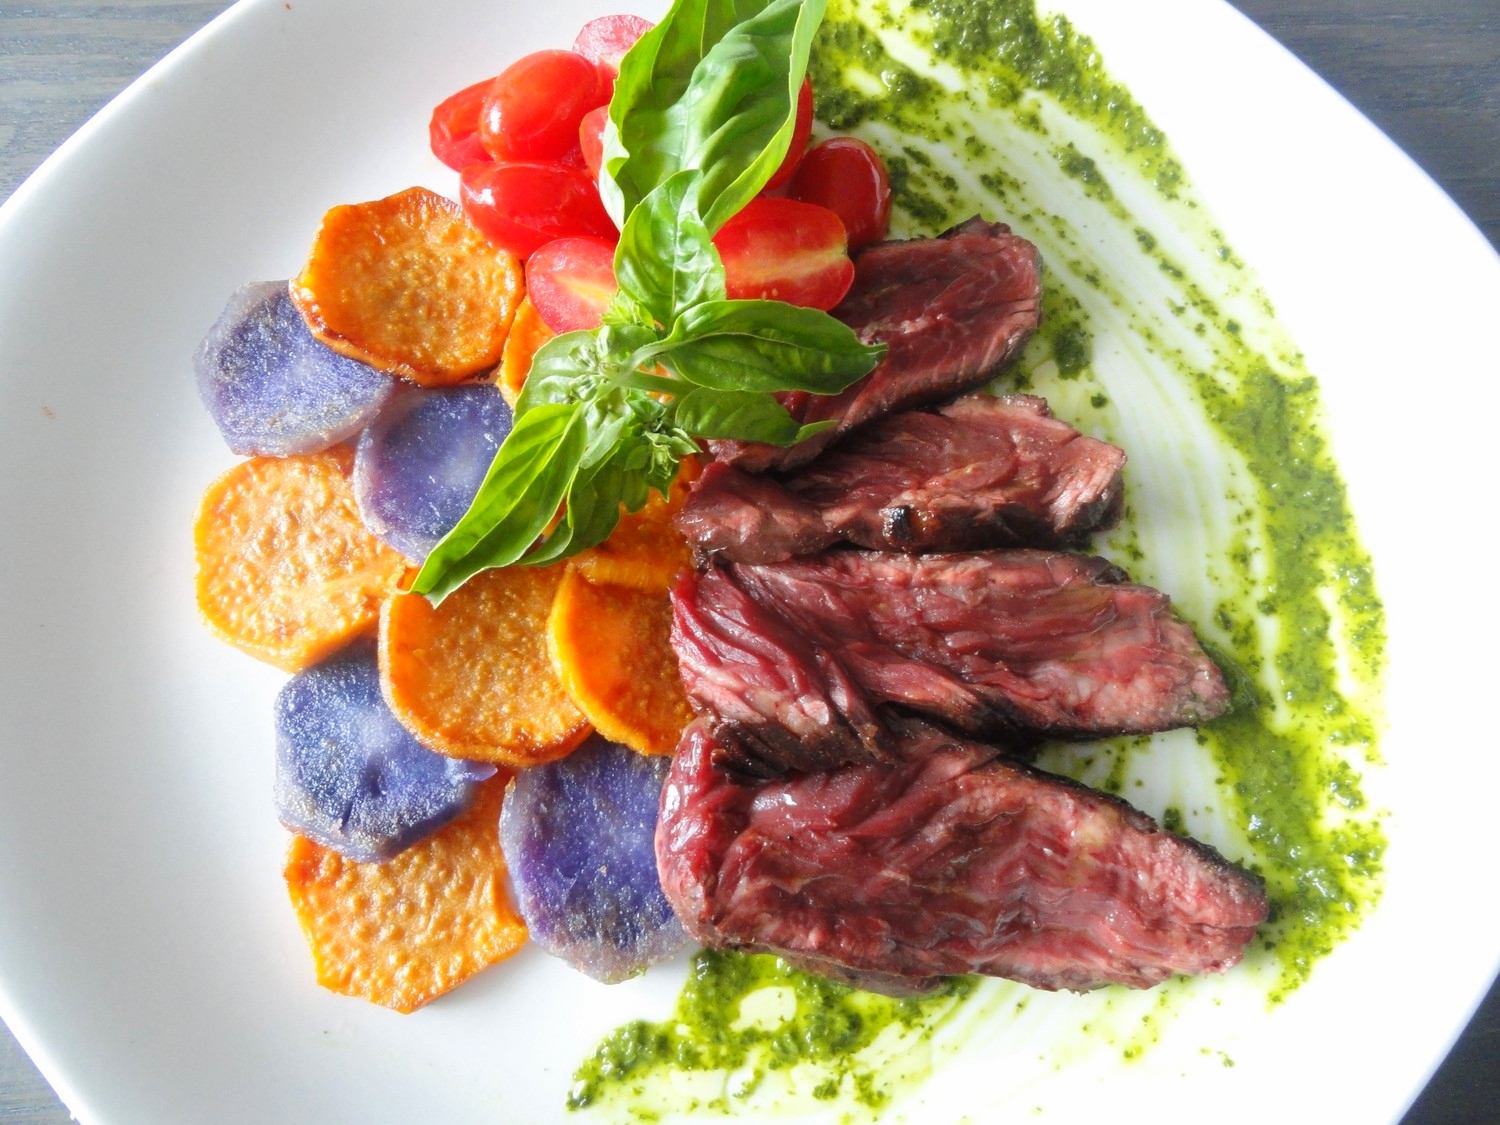 Seared beef controfiletto on chimichurri sauce with sweet and purple potato medallions